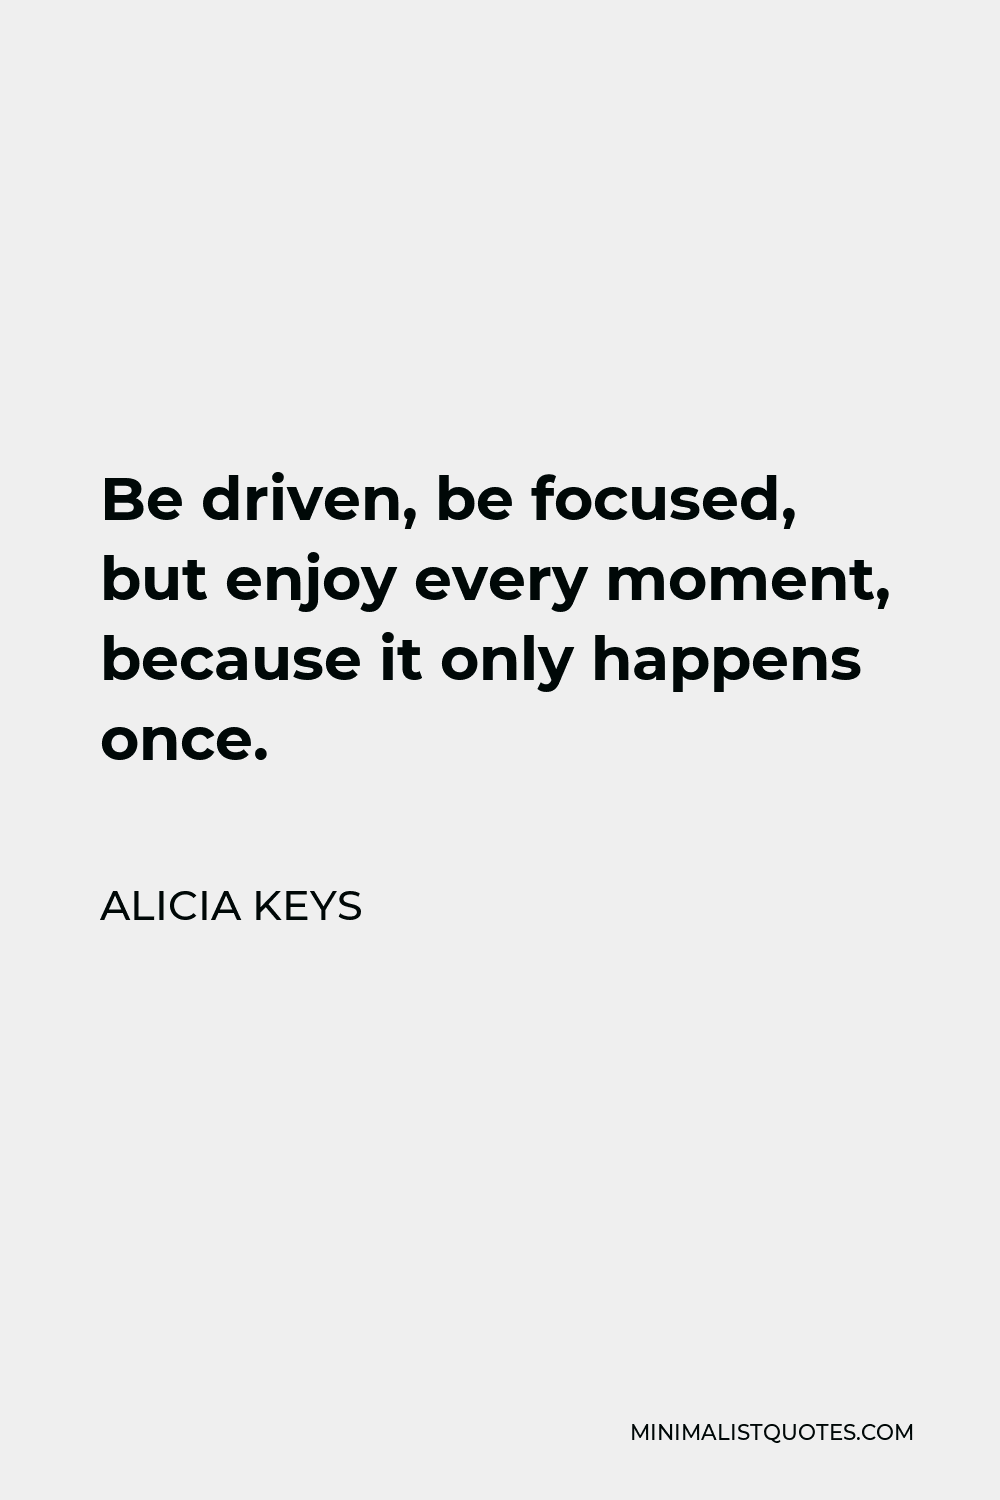 Alicia Keys Quote - Be driven, be focused, but enjoy every moment, because it only happens once.